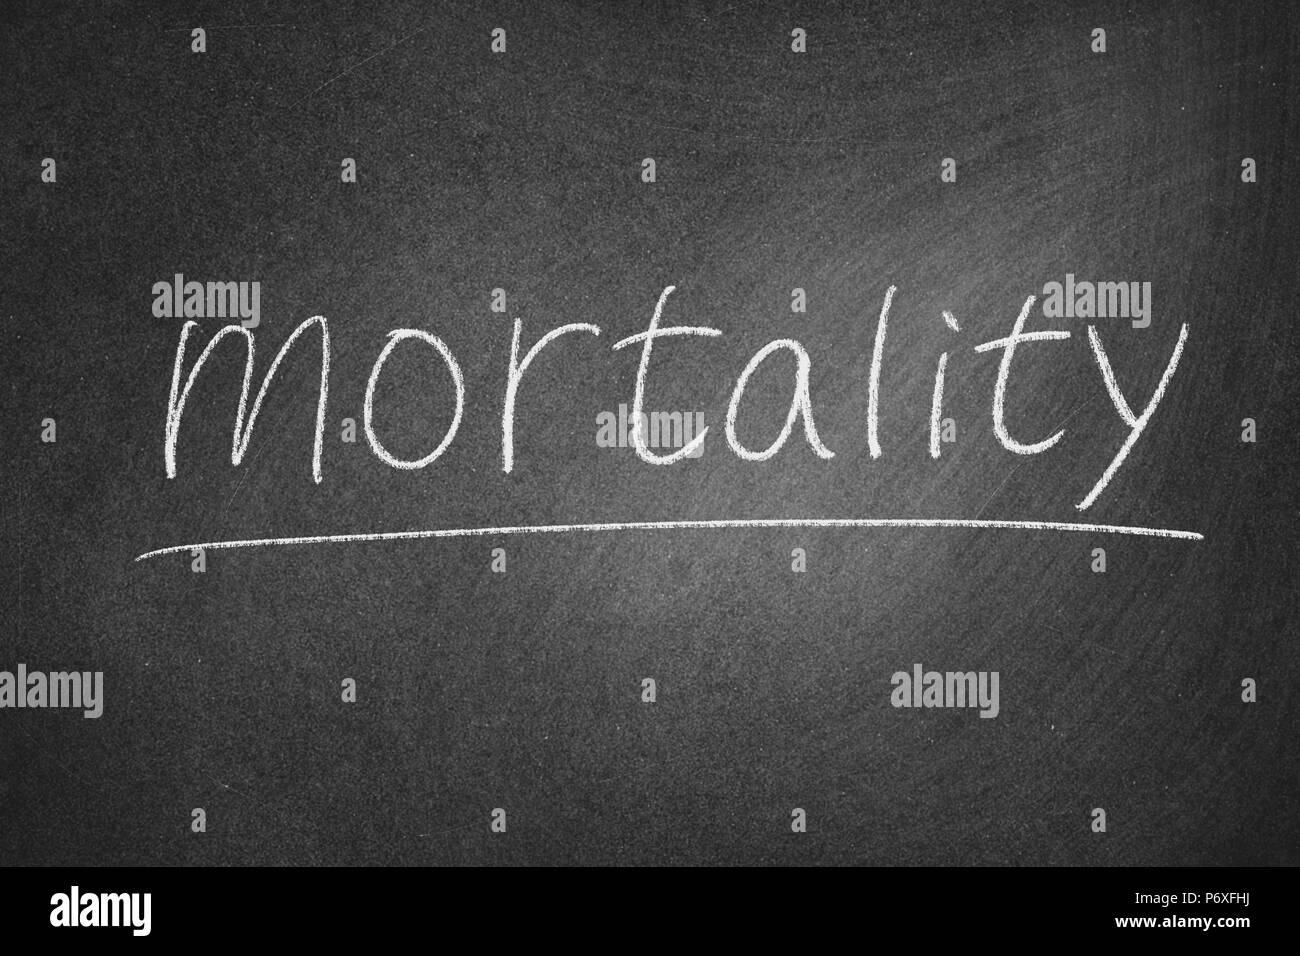 mortality concept word on a blackboard background Stock Photo